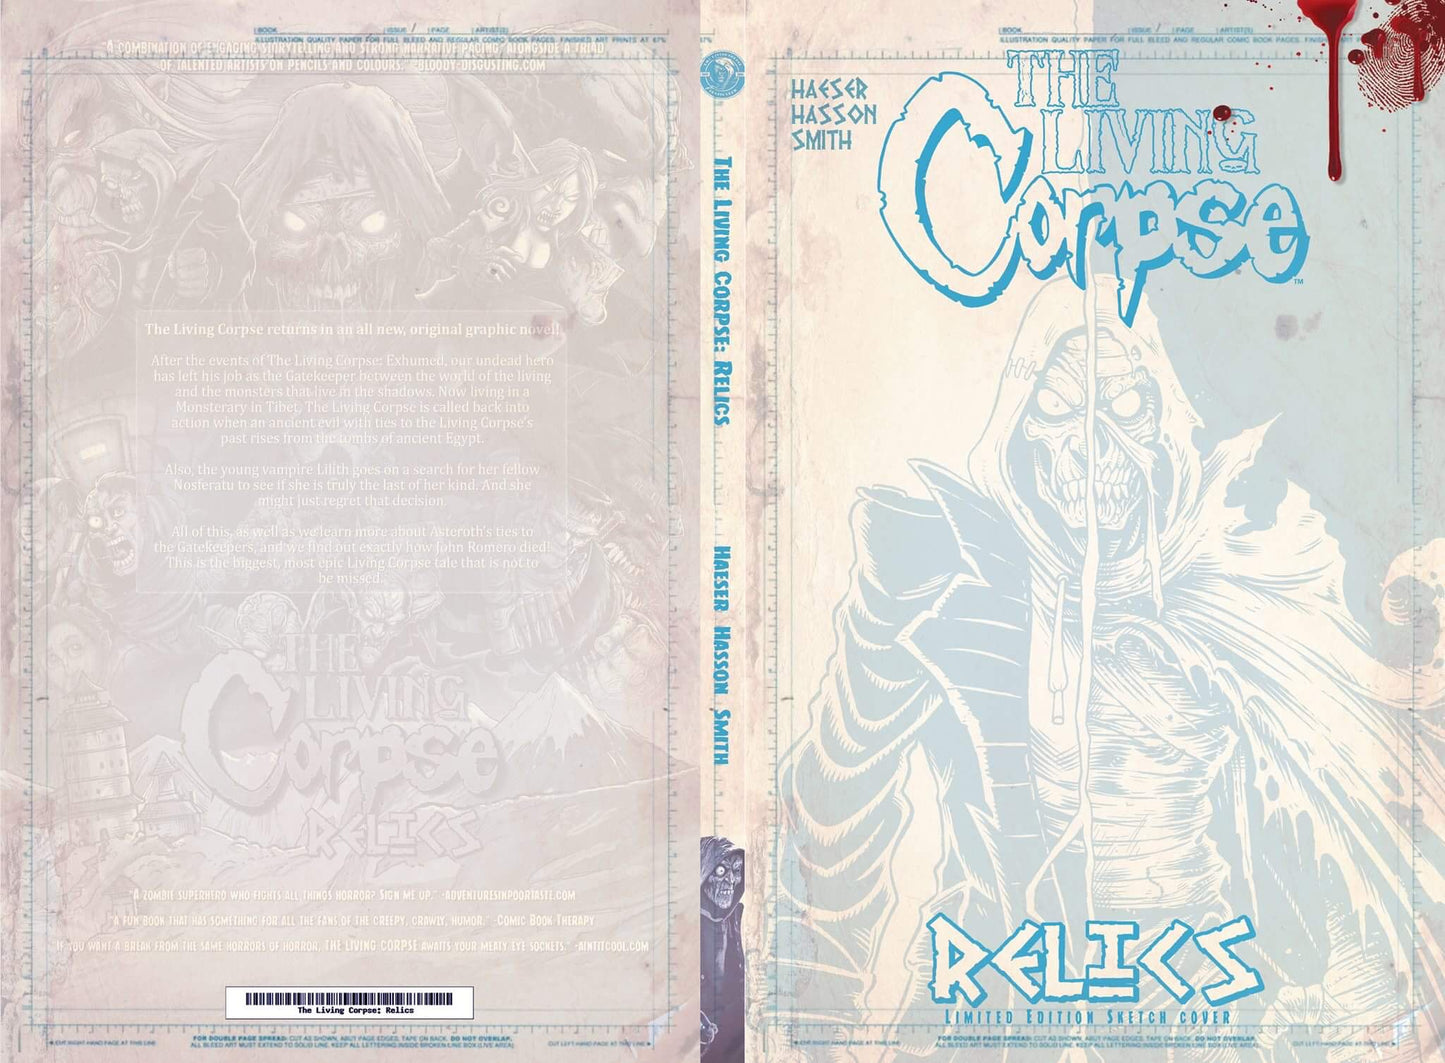 The Living Corpse: Relics (limited print run)